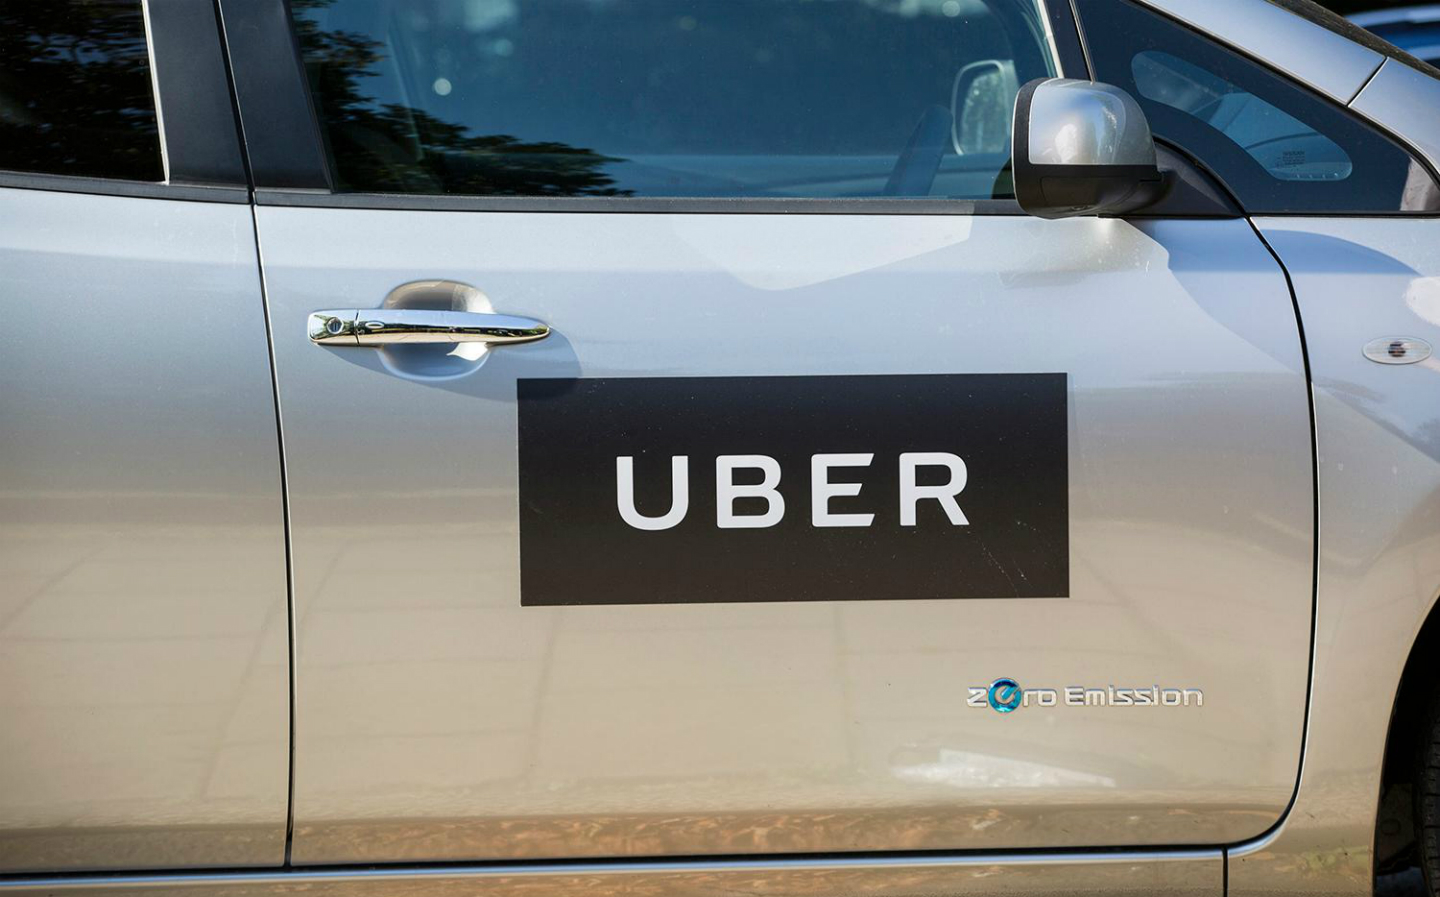 York becomes second city to ban Uber